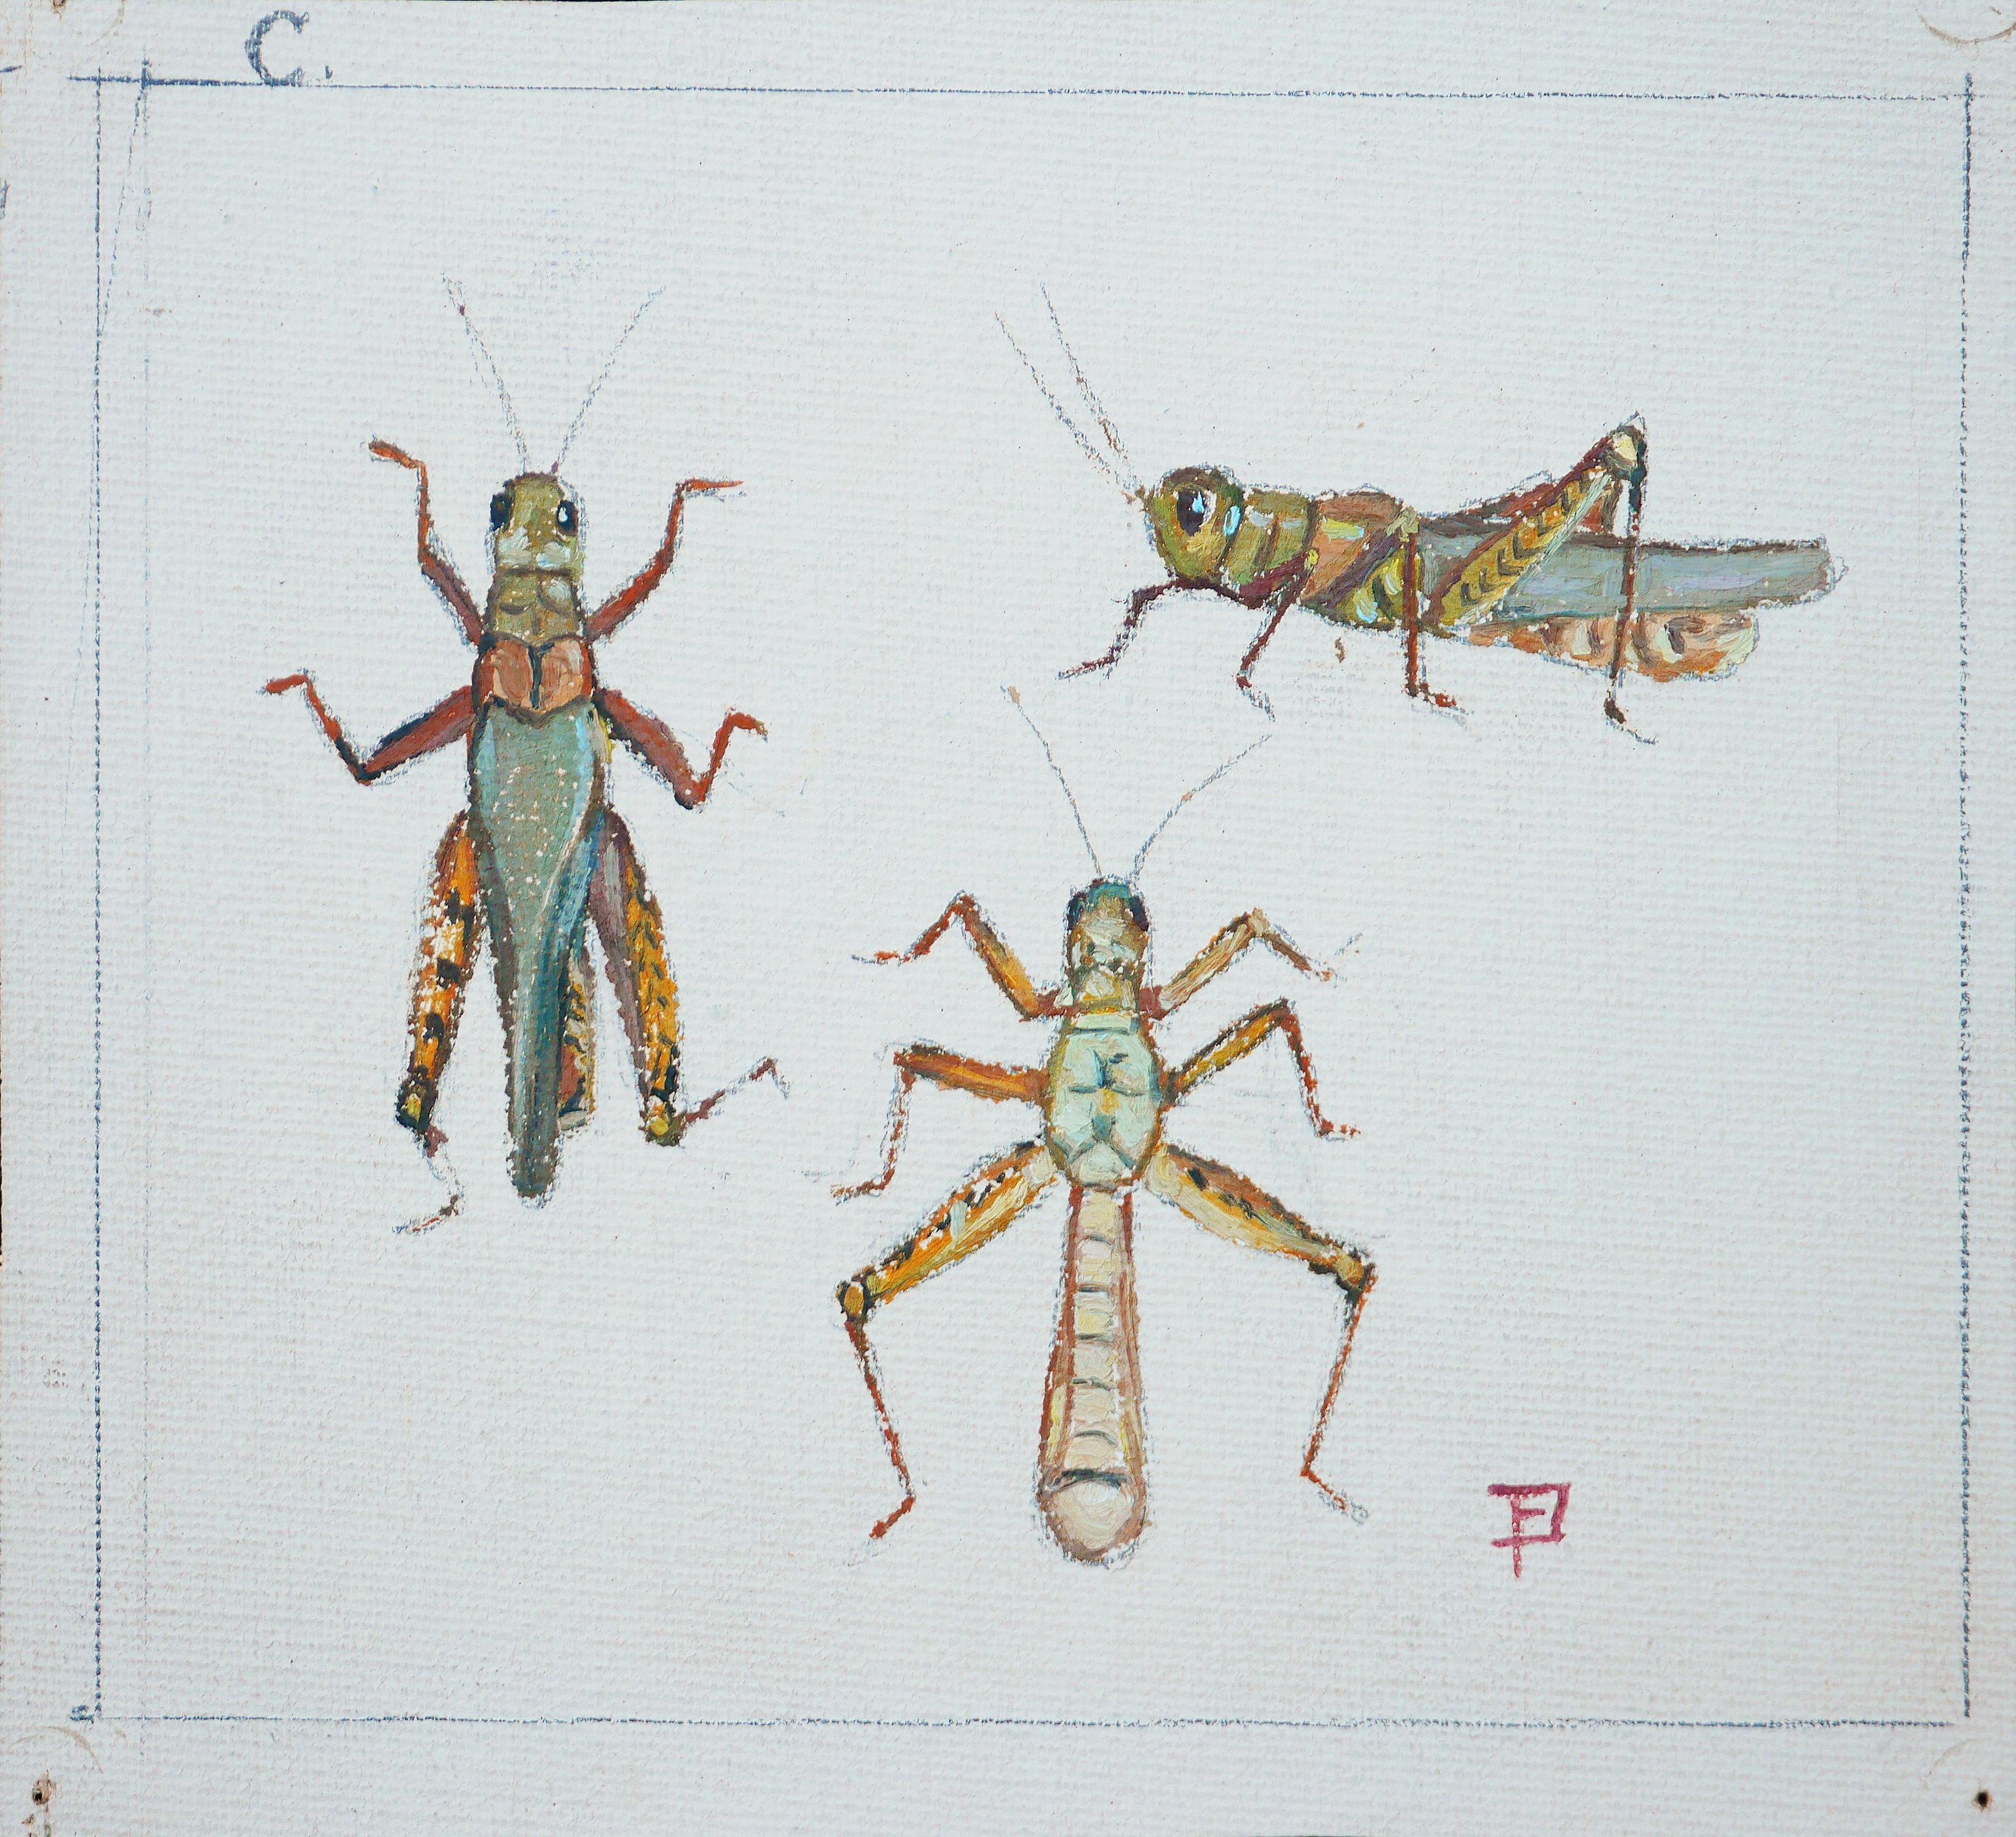 "Study of Crickets" Green and Brown Abstract Watercolor Illustration of Crickets